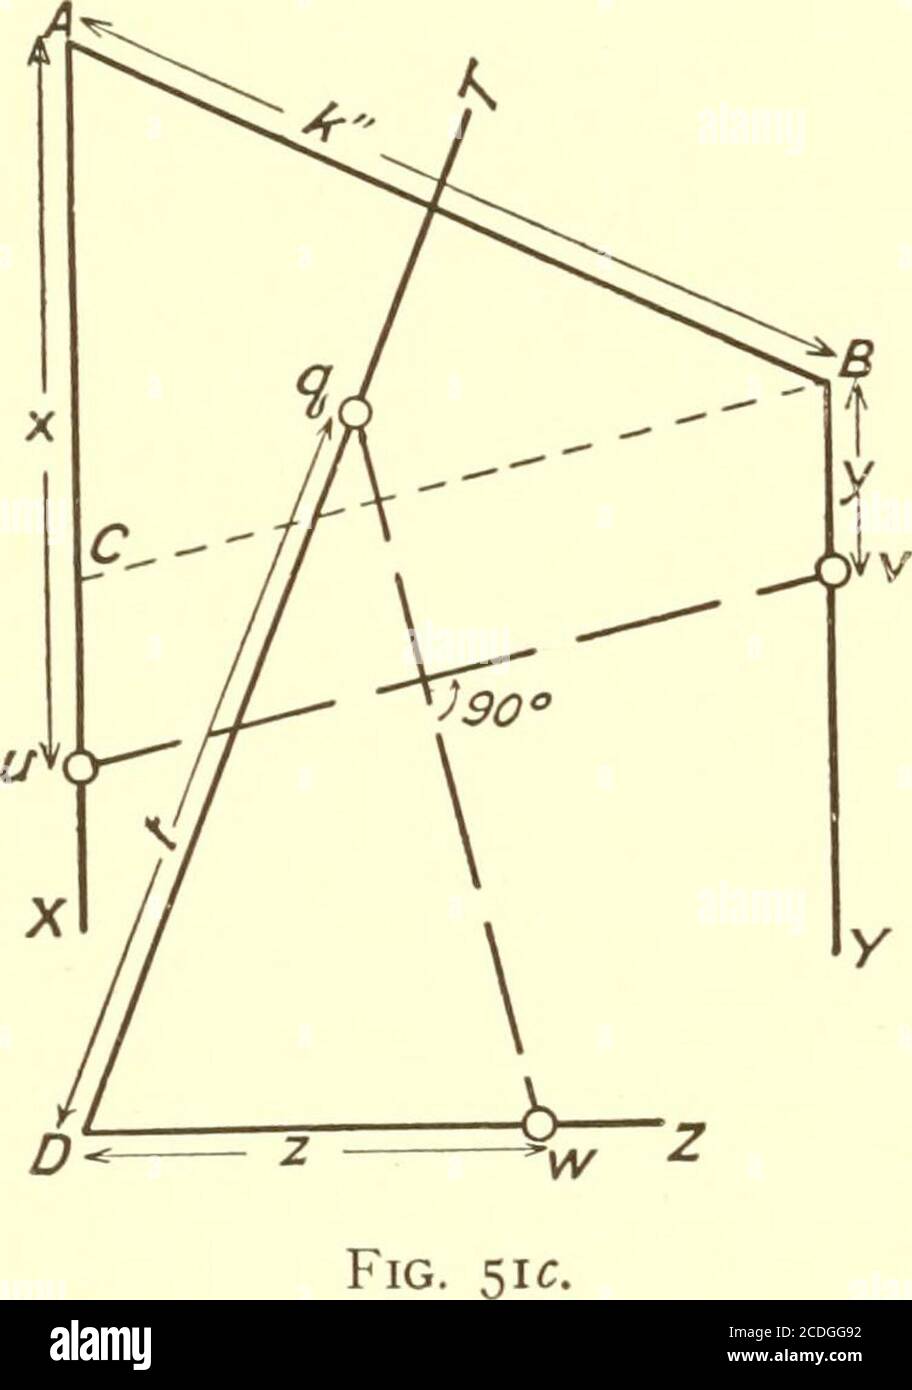 Graphical And Mechanical Computation T Draw Parallel To Theseindex Lines And Let Ab K Inches Then In The Similar Triangles Acband Awq We Have Ac Ab